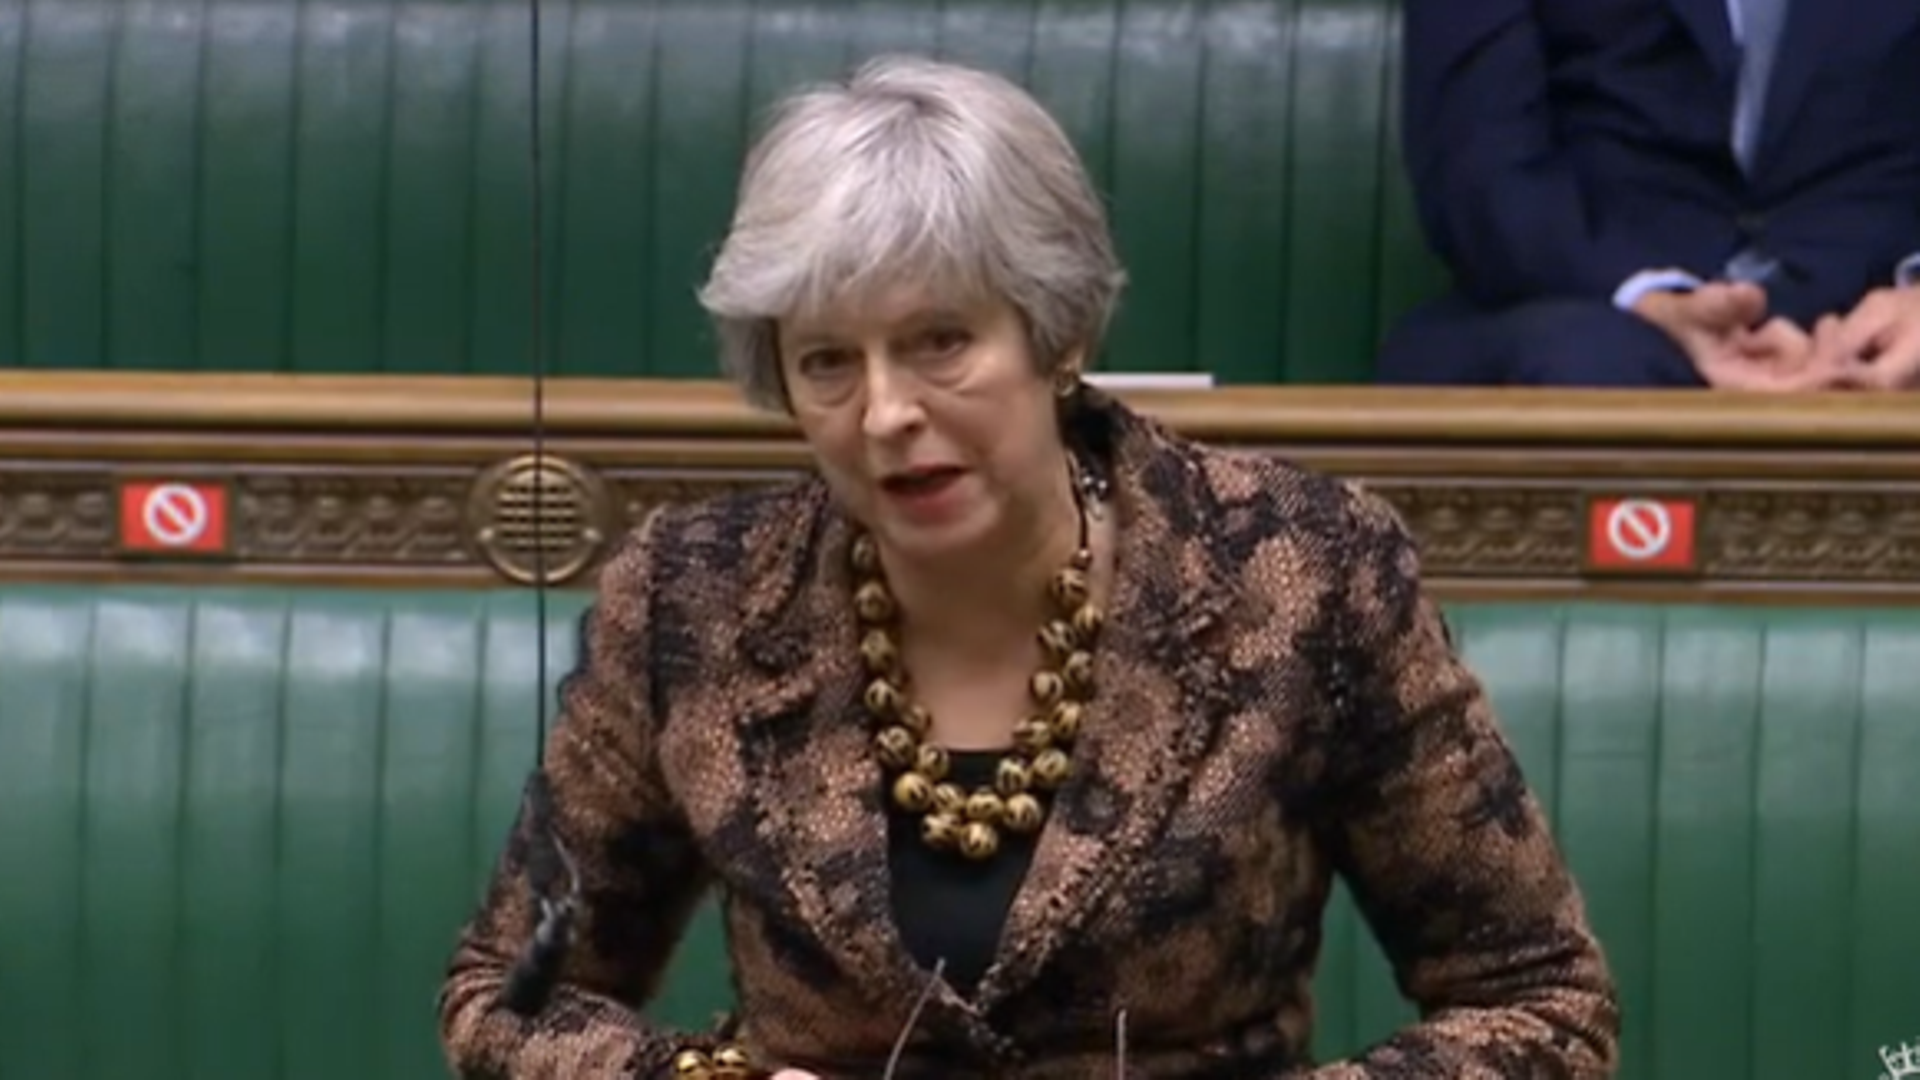 Theresa May in the House of Commons - Credit: Parliament Live